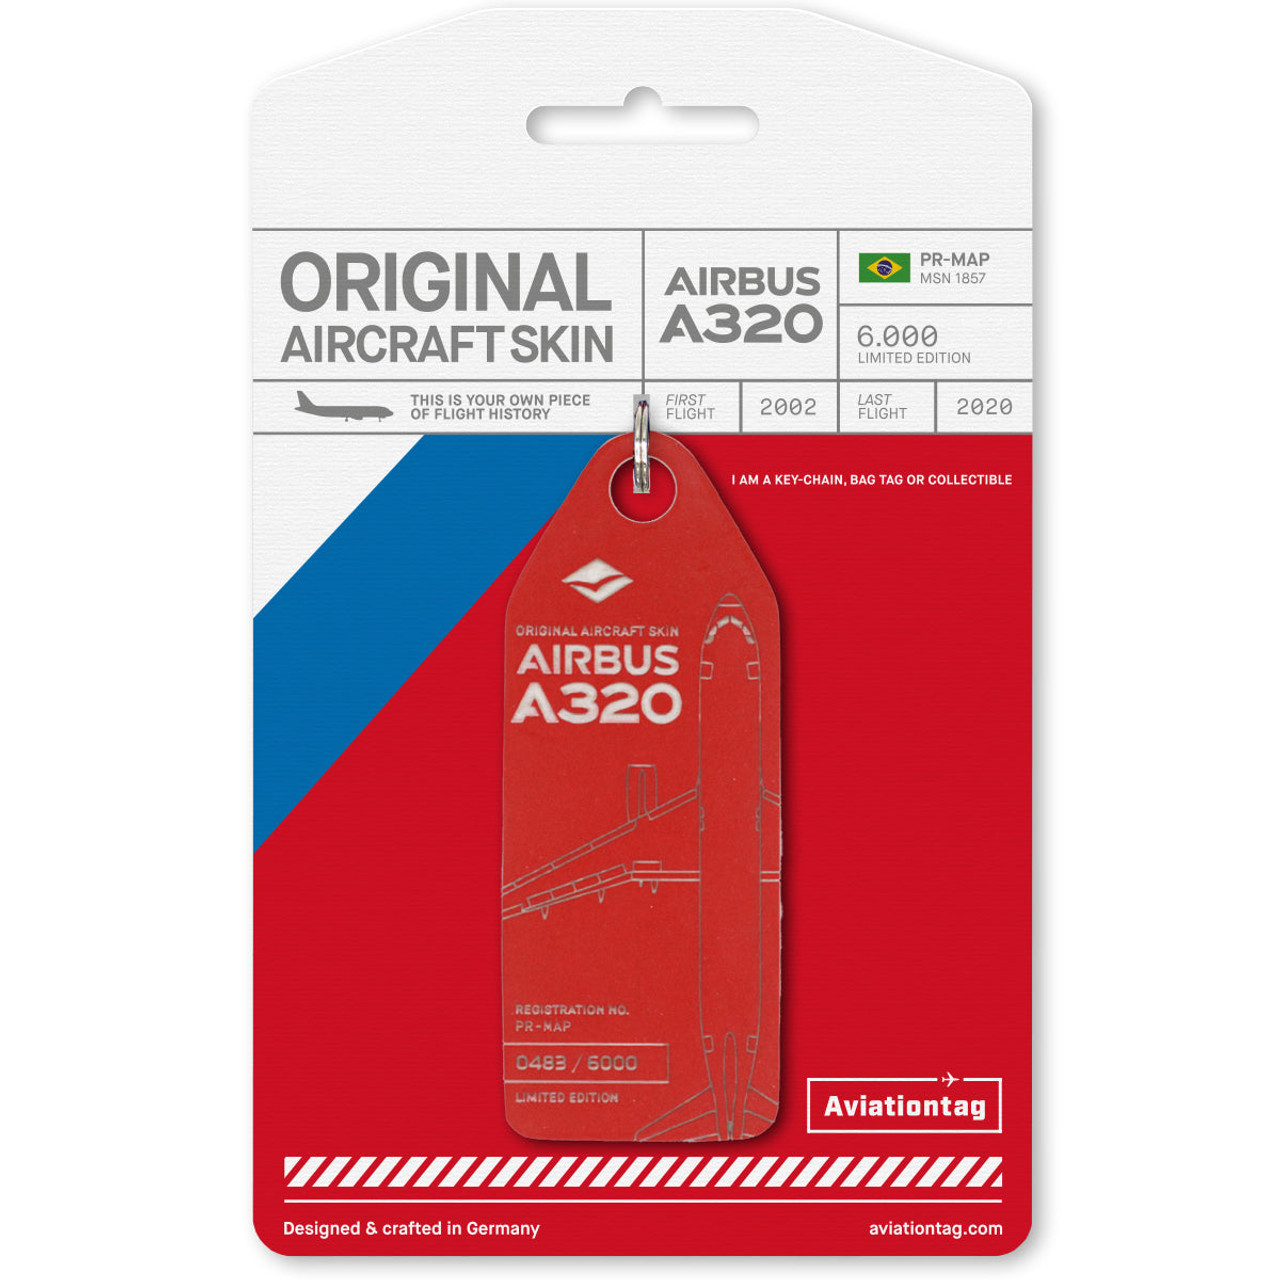 AviationTag Airbus A320 Keychain - PR-MAP - Red 